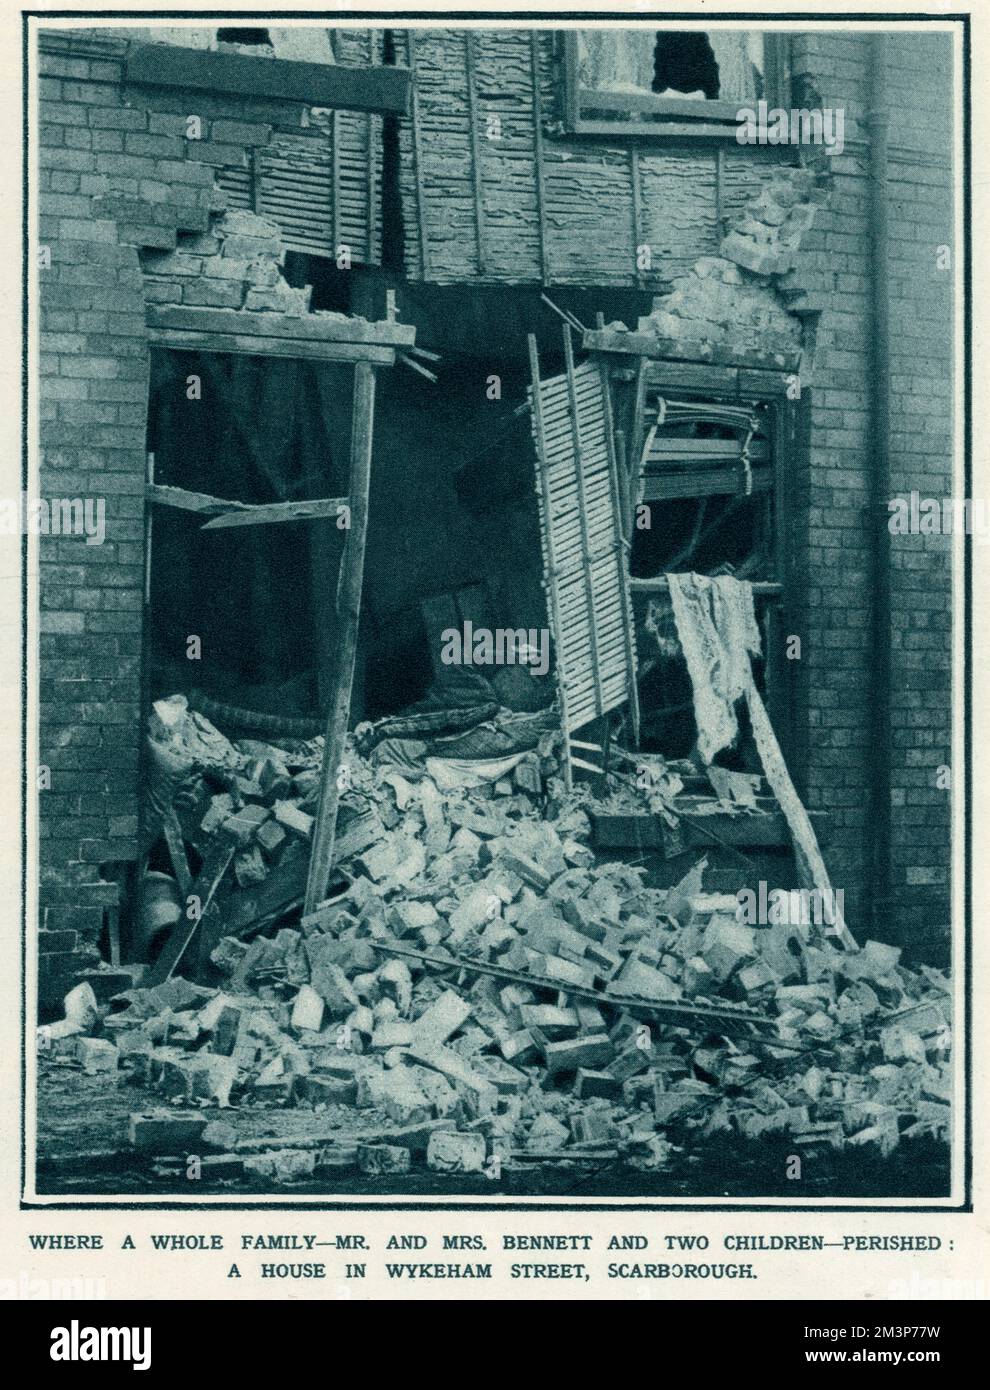 On 16th December 1914, Scarborough was attacked by the Imperial German Navy, showing a ruined house in Wykeham Street, Scarborough, which killed Mr and Mrs Barrett and their two children perished.  1914 Stock Photo